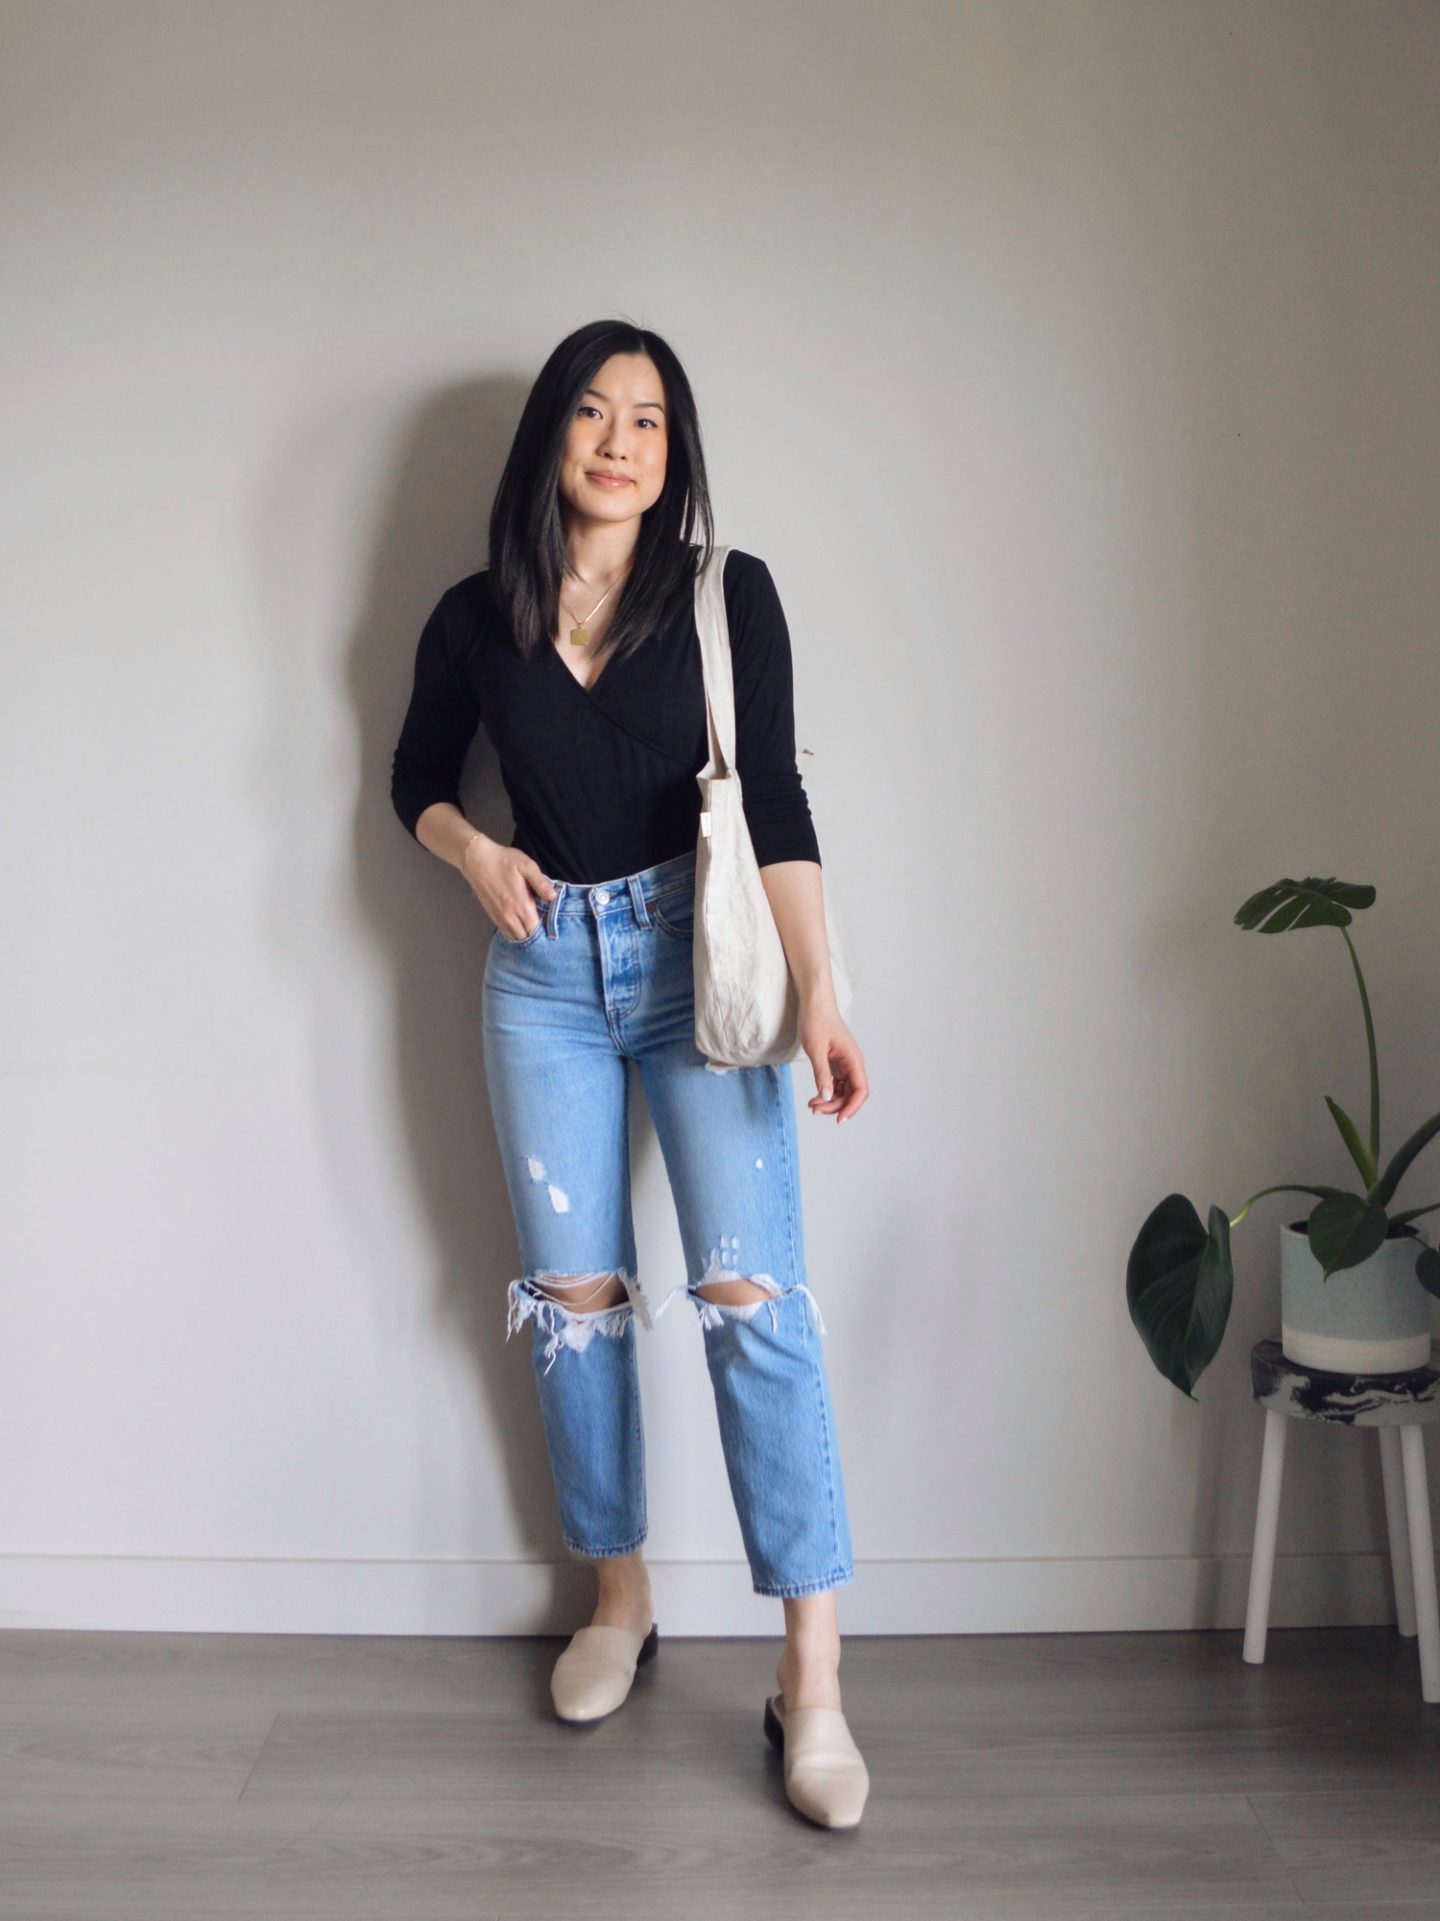 Outfit details: Encircled wrap top, Levi's wedgie straight jeans, Maguire Boutique mules, Harly Jae tote